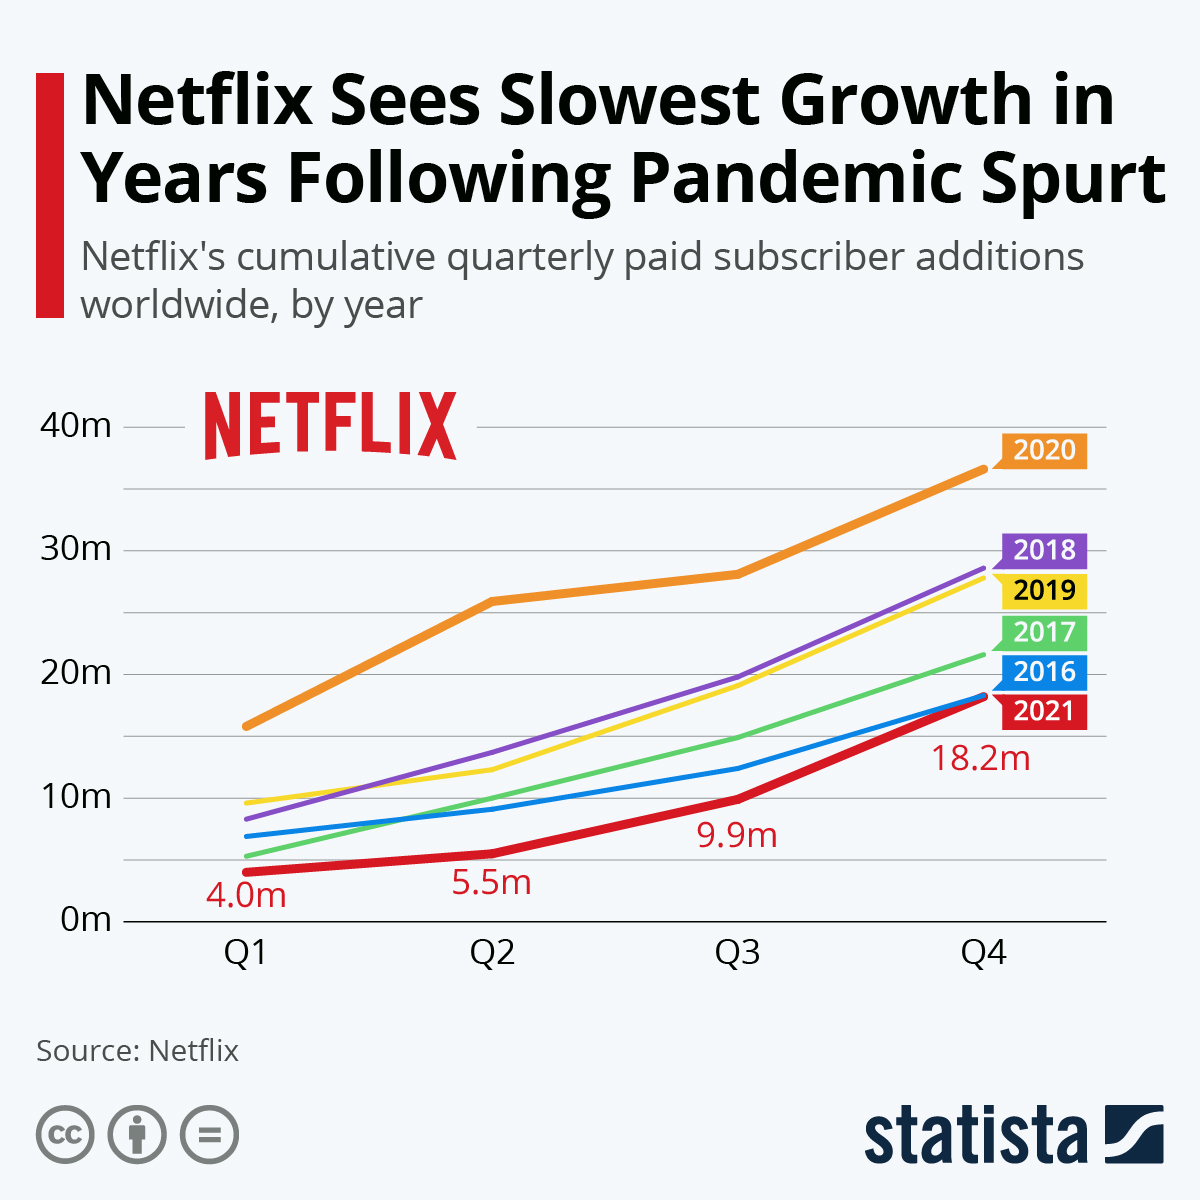 Netflix Sees Slowest Growth in Years Following Pandemic Spurt